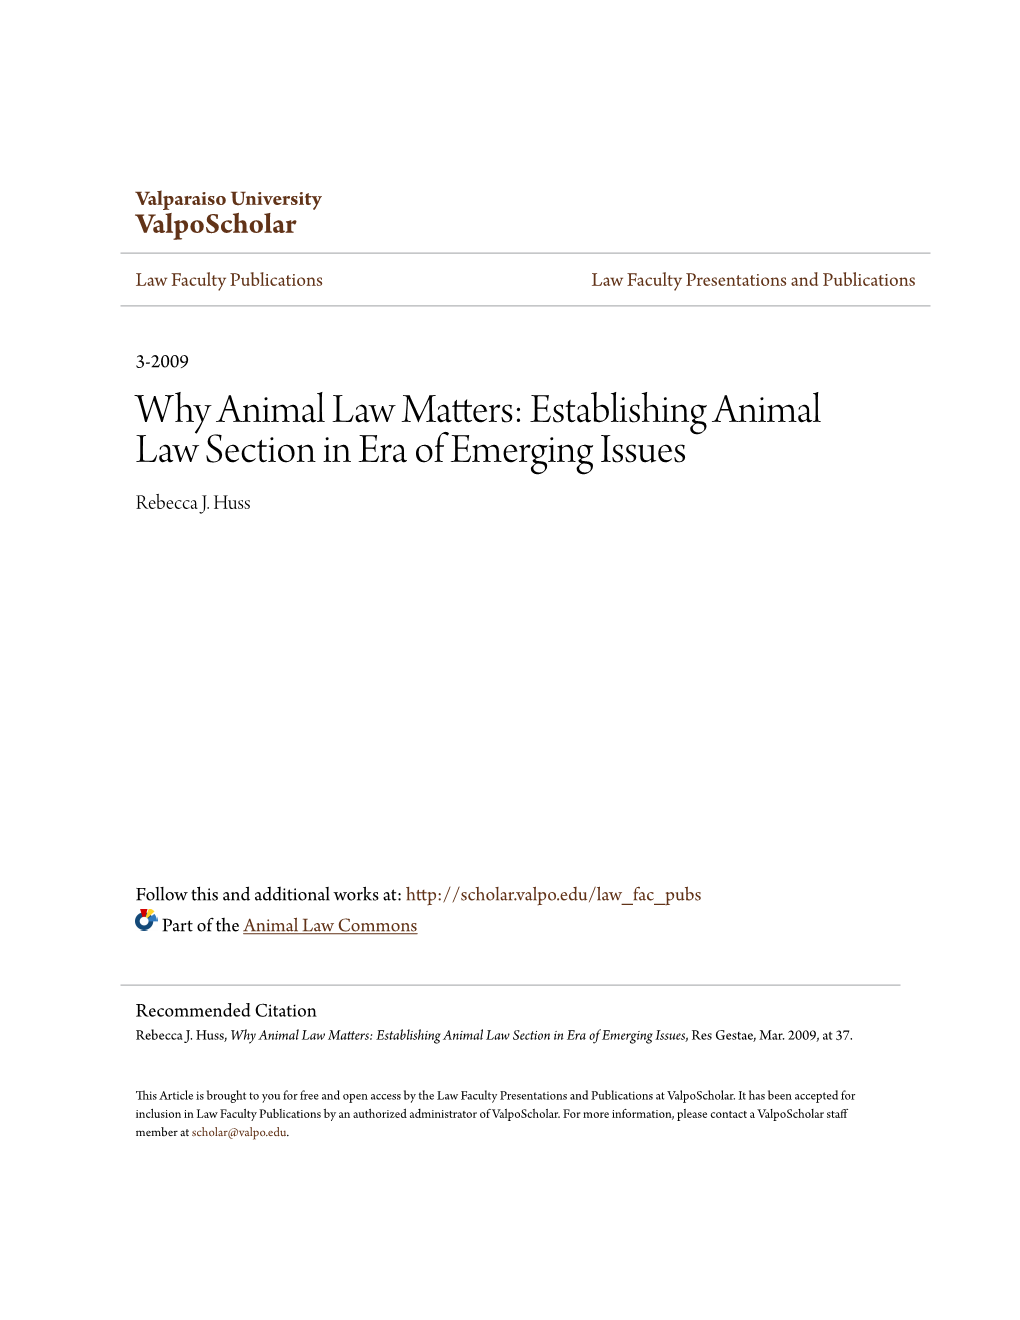 Why Animal Law Matters: Establishing Animal Law Section in Era of Emerging Issues Rebecca J